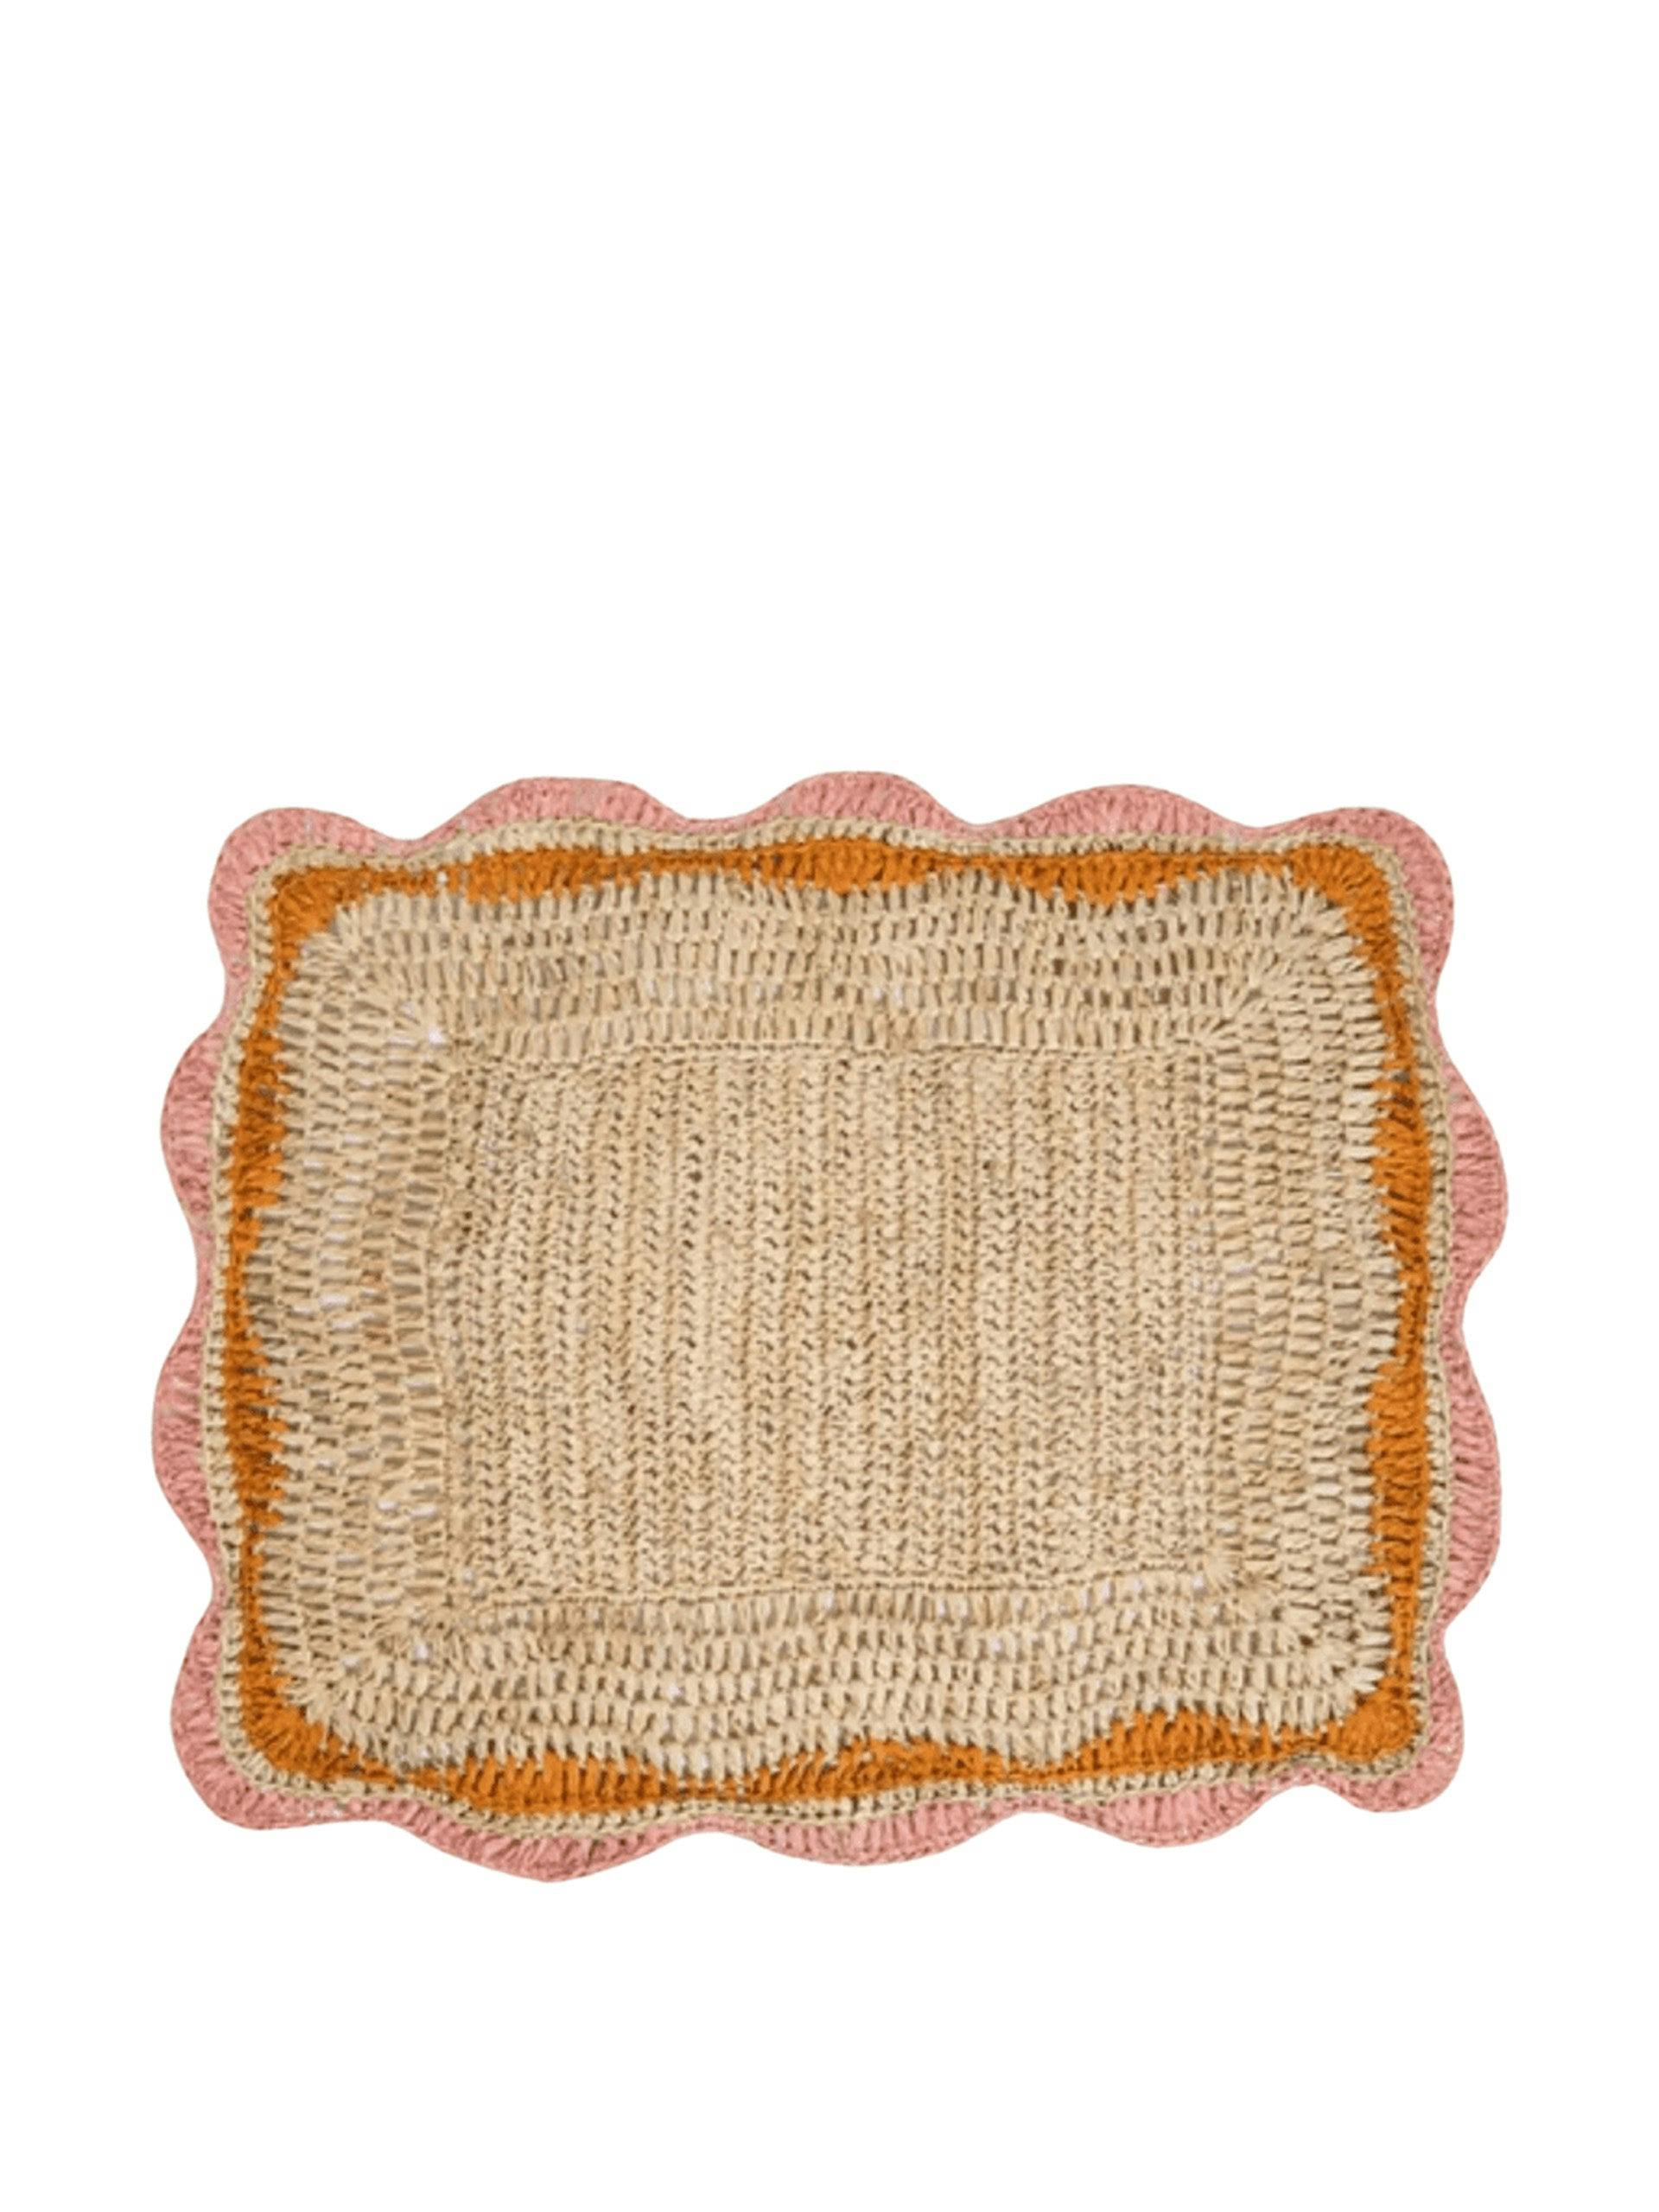 Garden party placemat with pink and orange edges